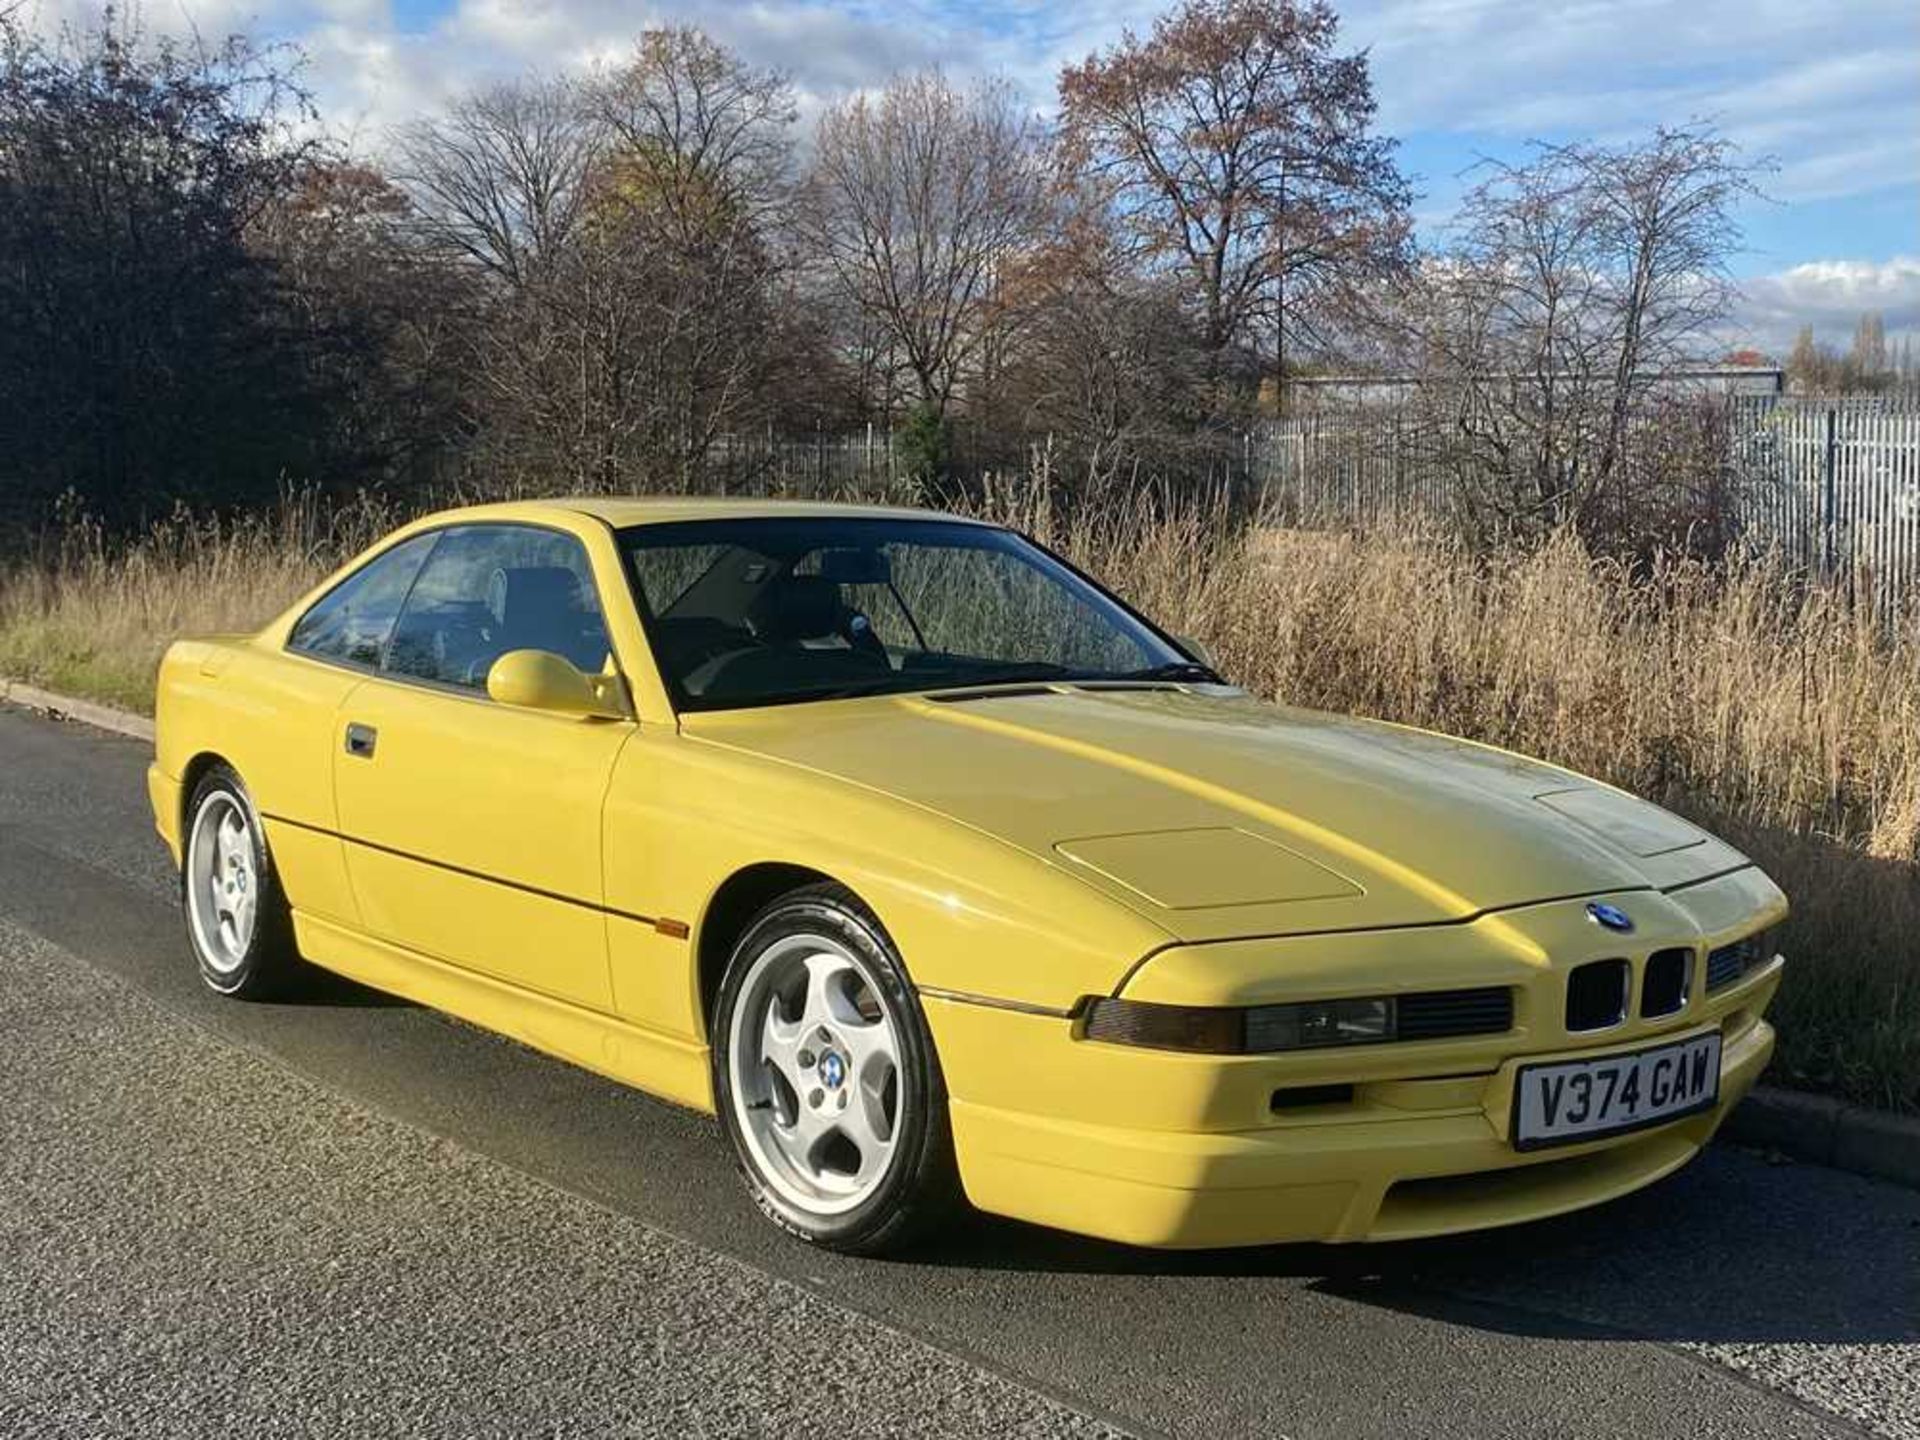 1997 BMW 840 CI Sport Understood to be 1 of just 38 finished in Dakar Yellow II - Image 8 of 79